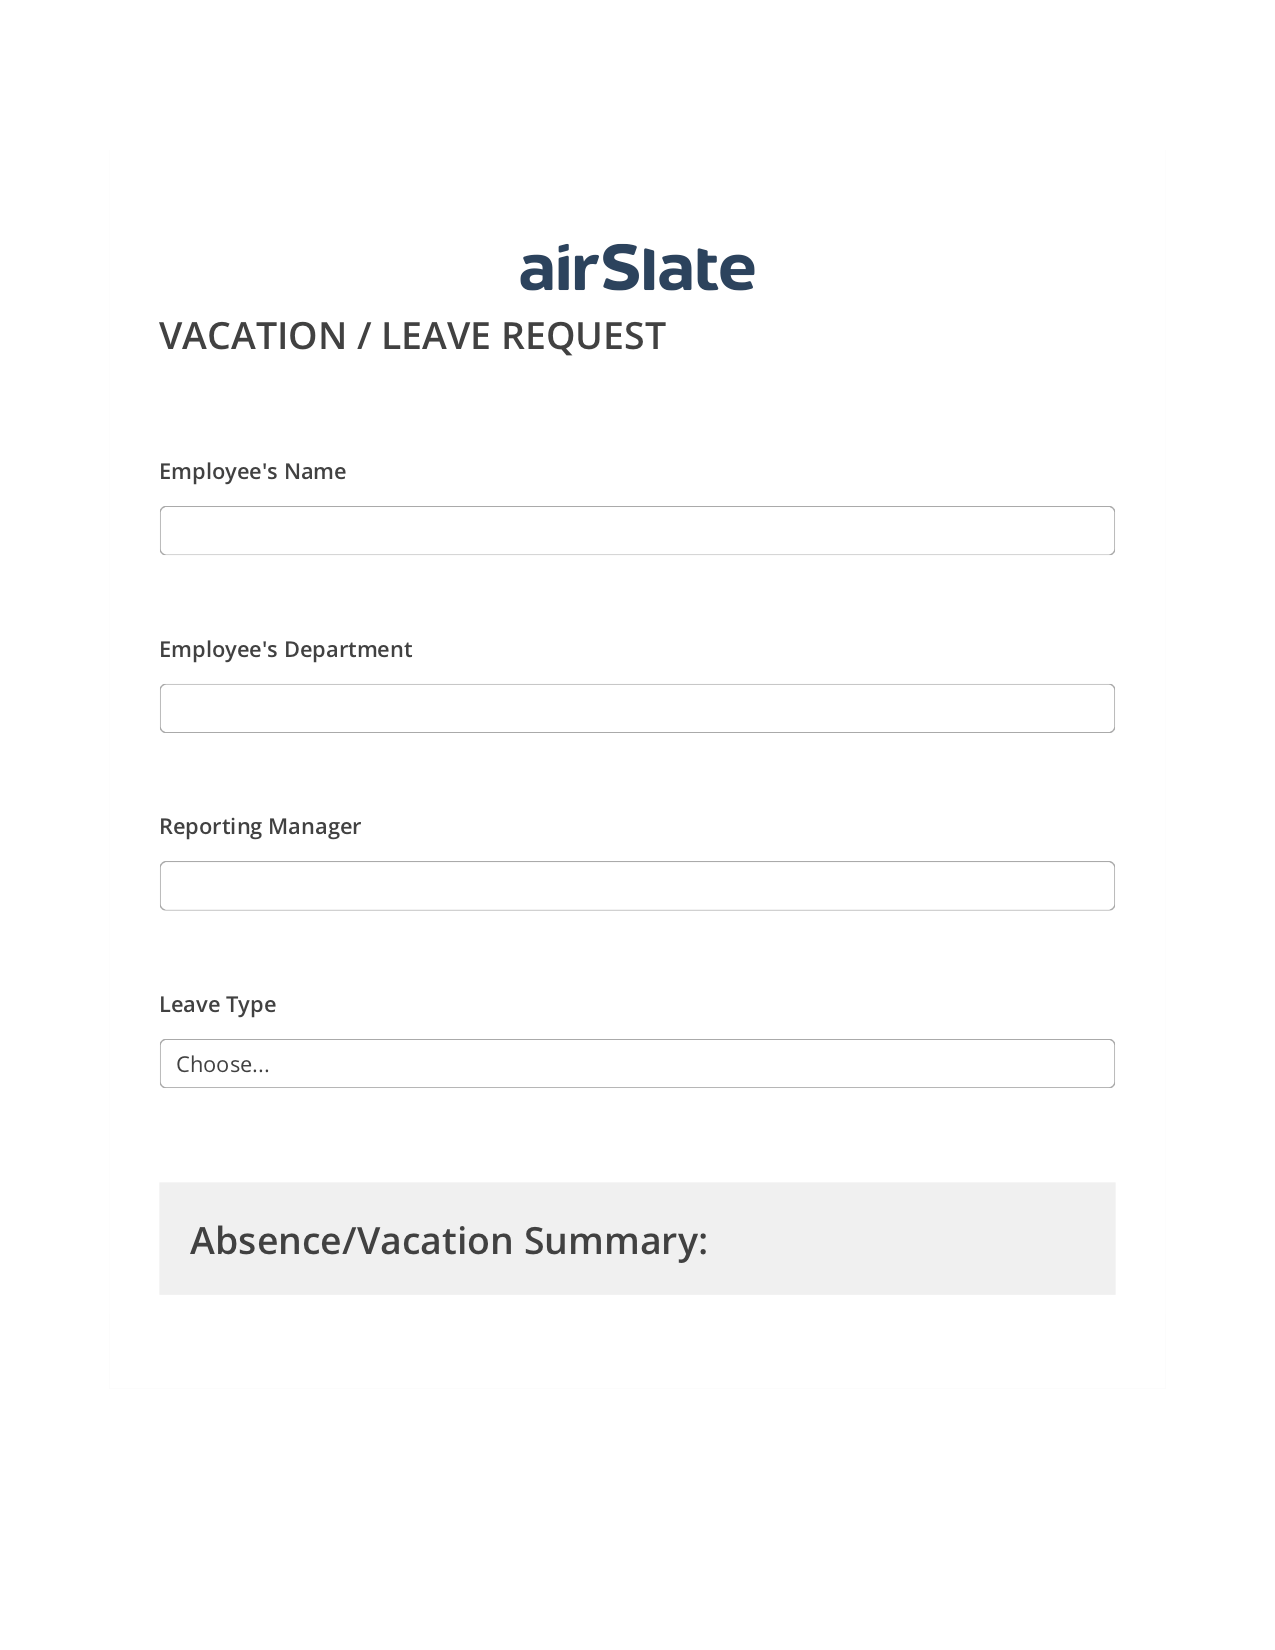 Vacation/Leave Request Workflow Pre-fill from another Slate Bot, Update MS Dynamics 365 Record Bot, Export to WebMerge Bot